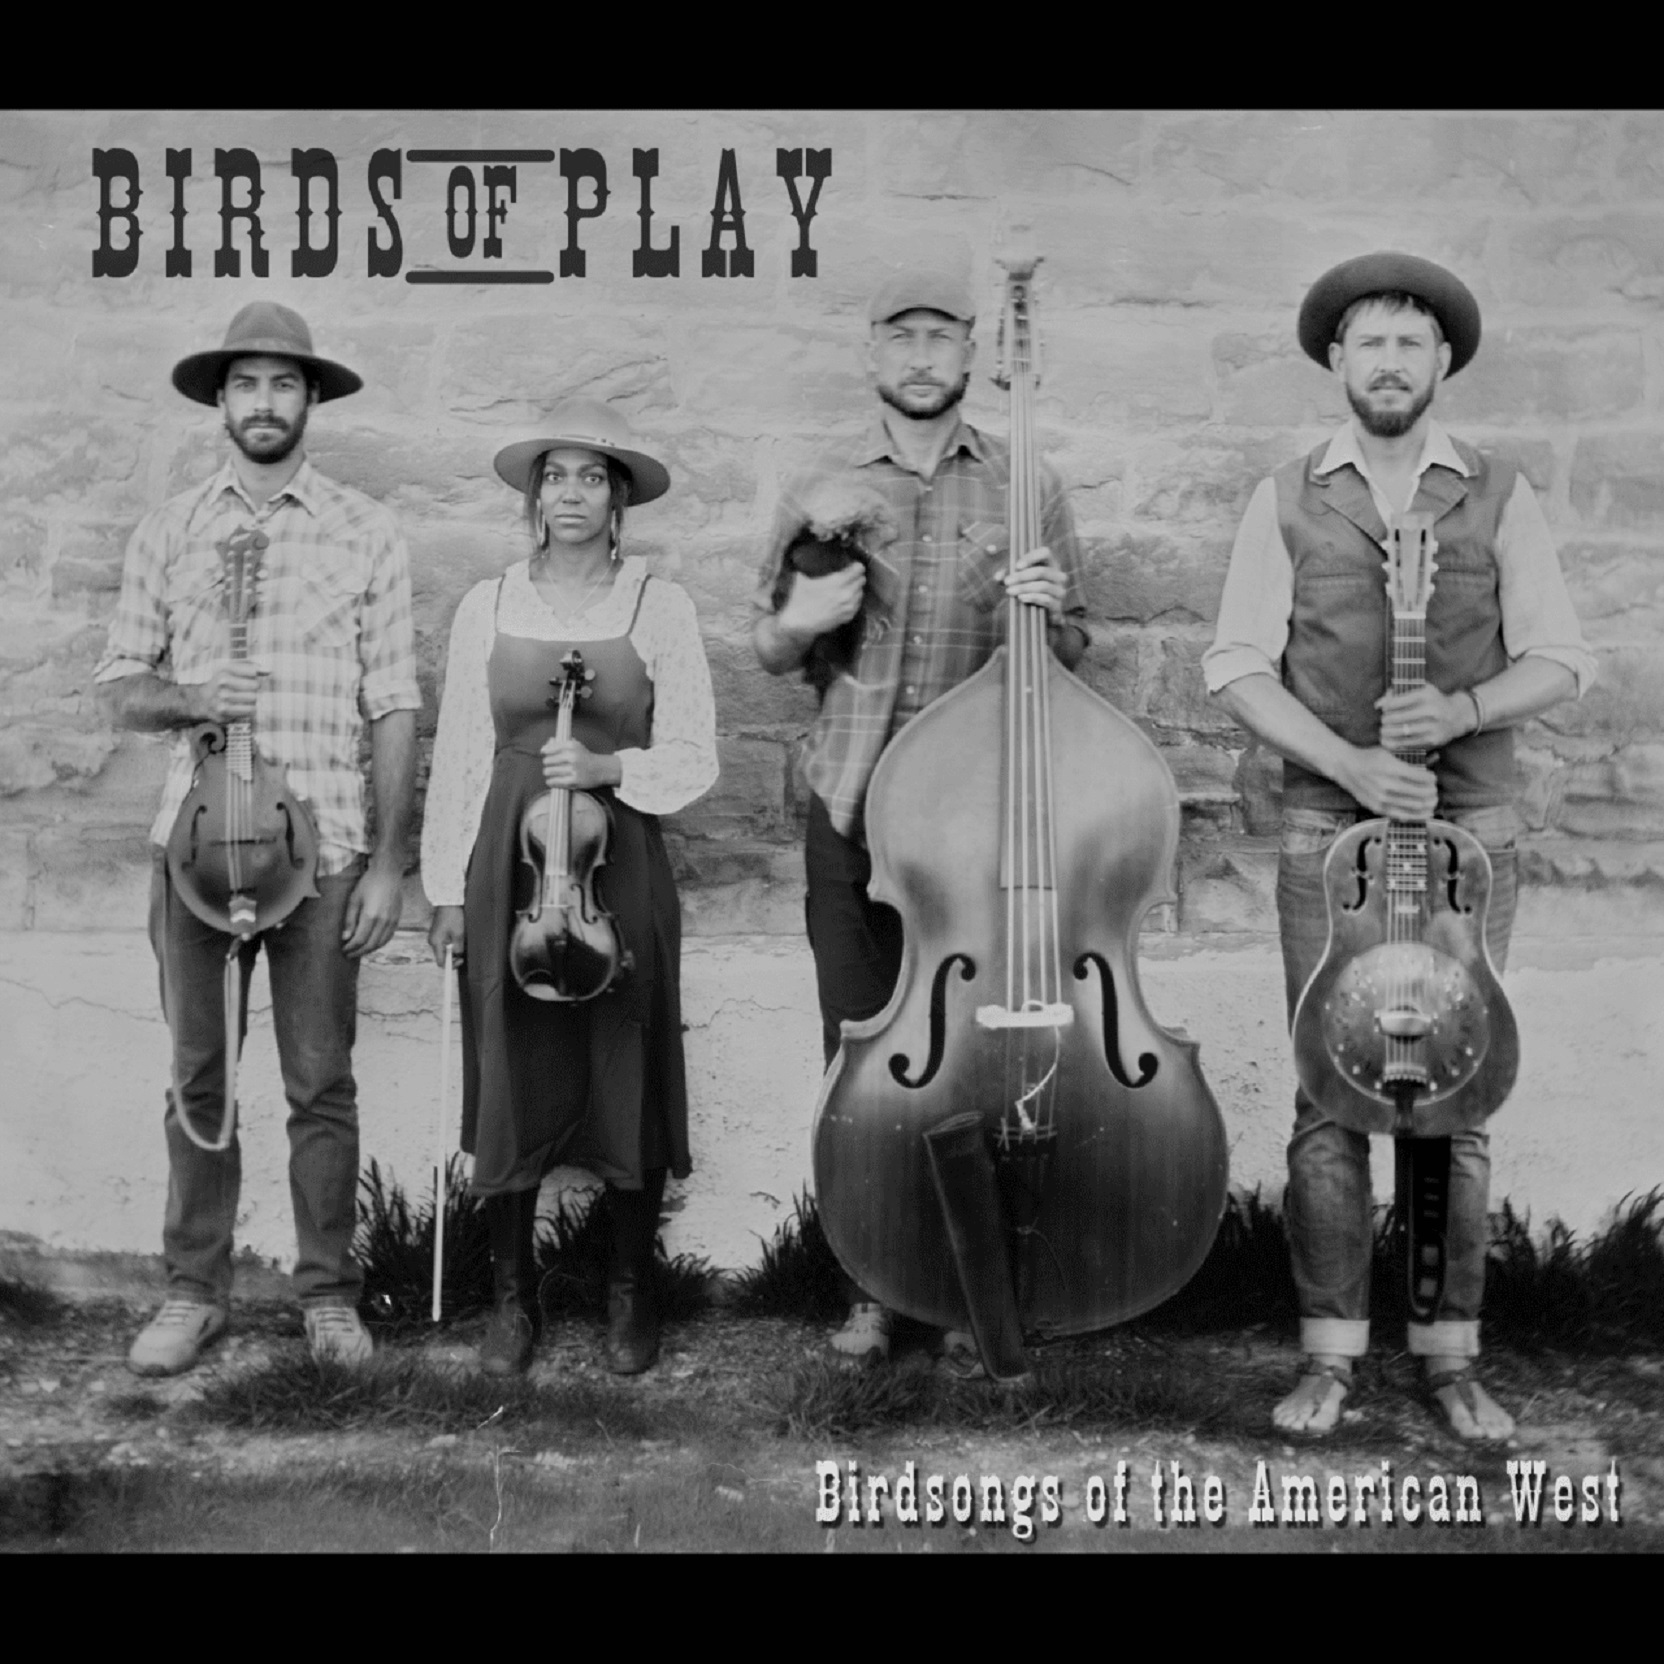 Colorado's Birds of Play Release 'Birdsongs of the American West' August 25